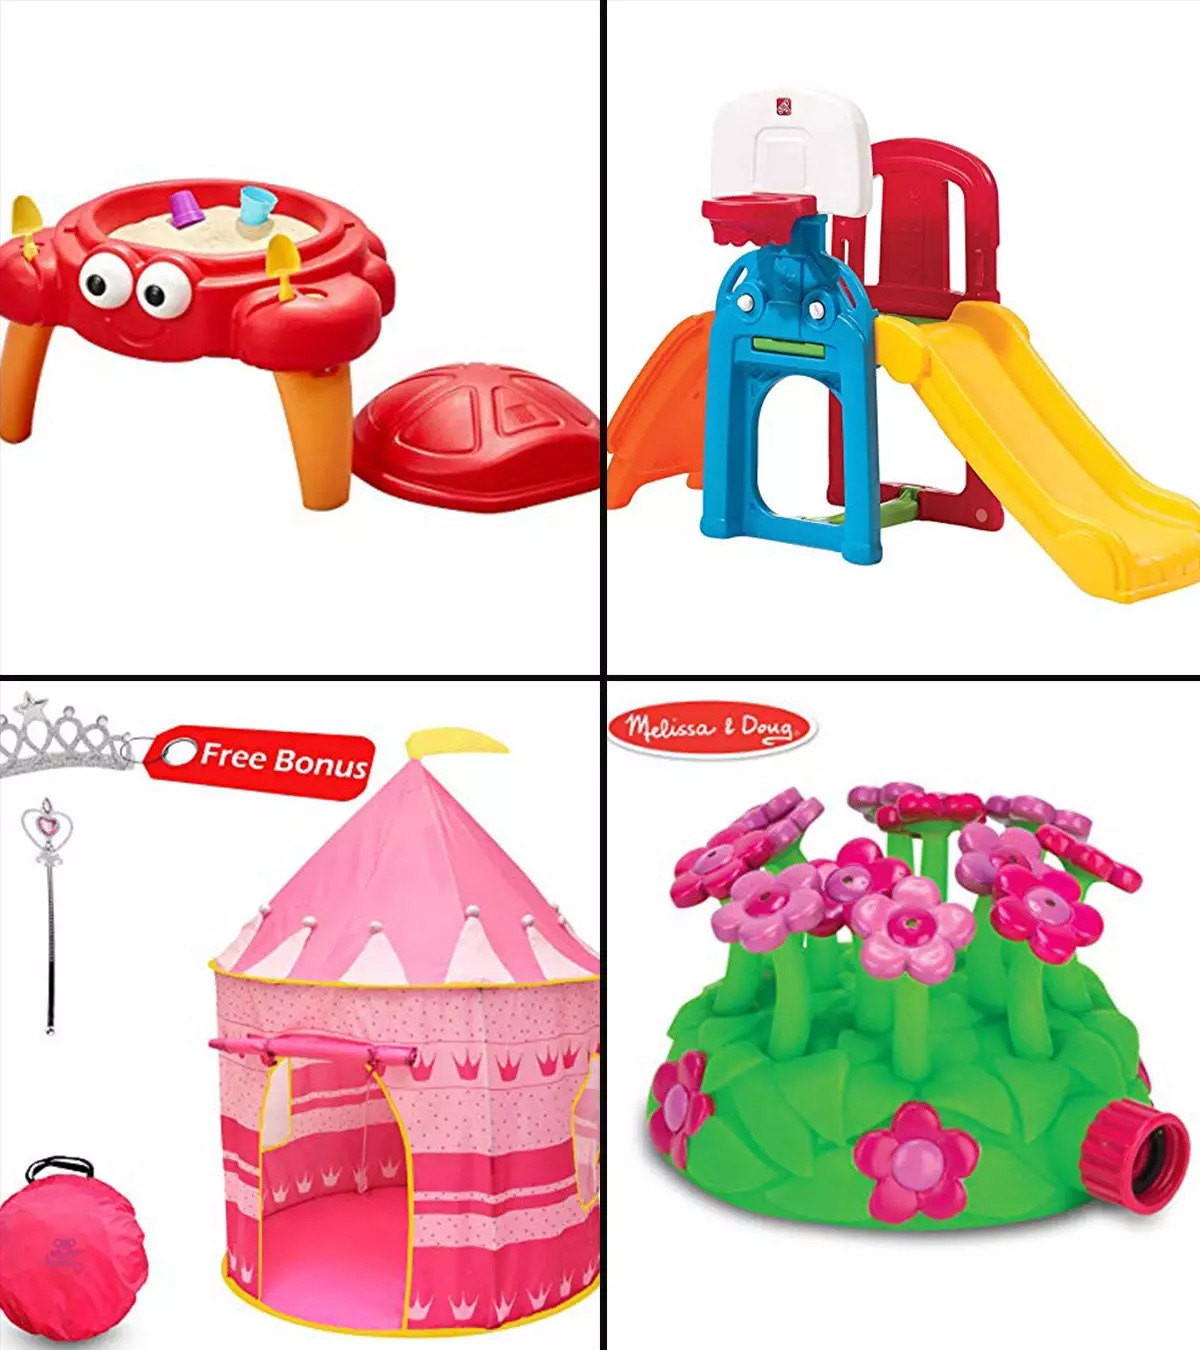 best garden toys for toddlers